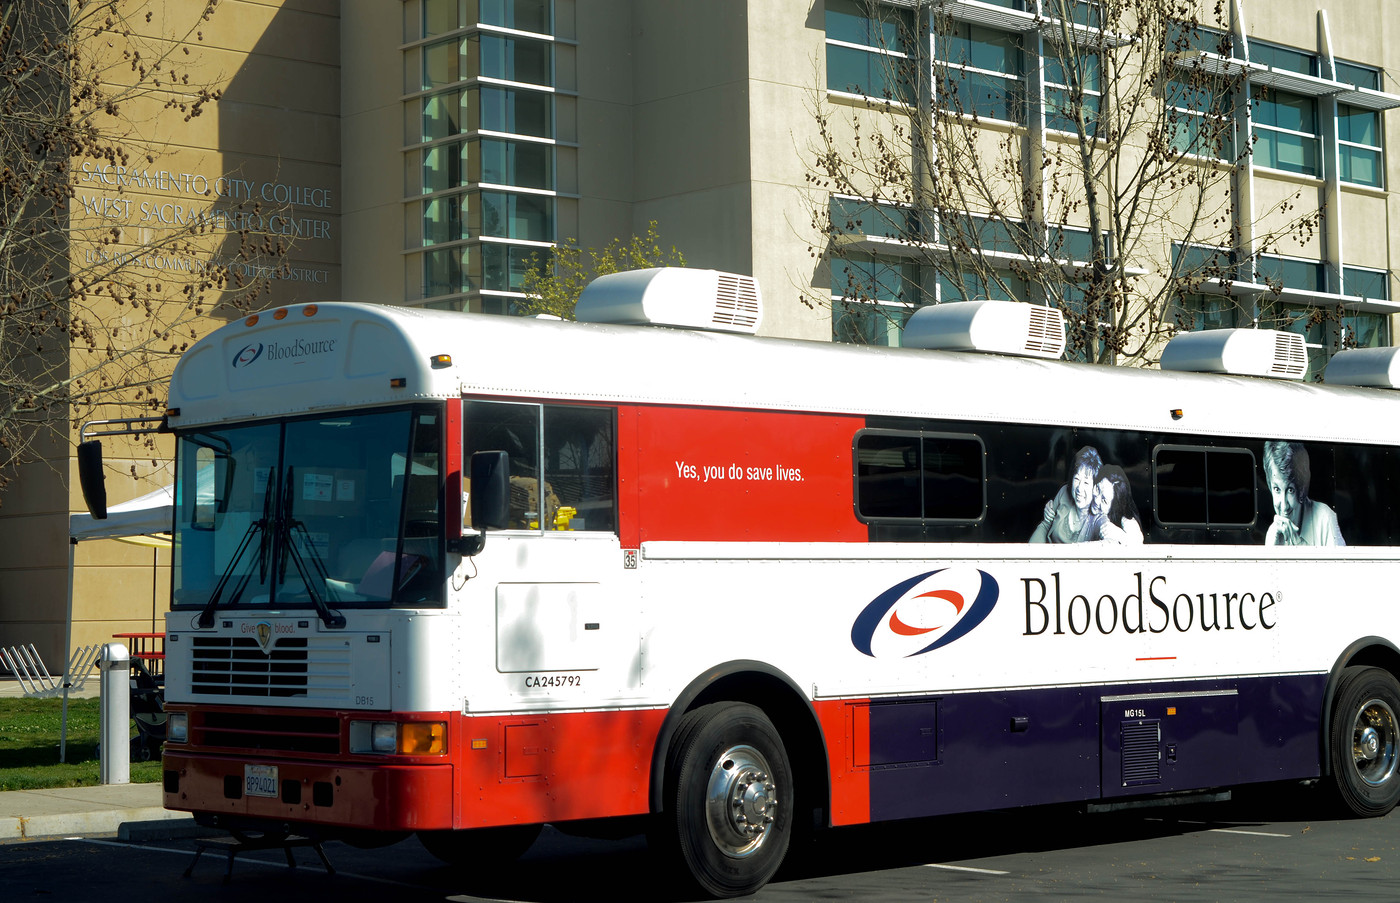 A Blood Souce bus is parket at the front of the on the City College West Sacramento Center March 15. Christopher Williams, Staff Photographer. |chrisWexpress@gmail.com